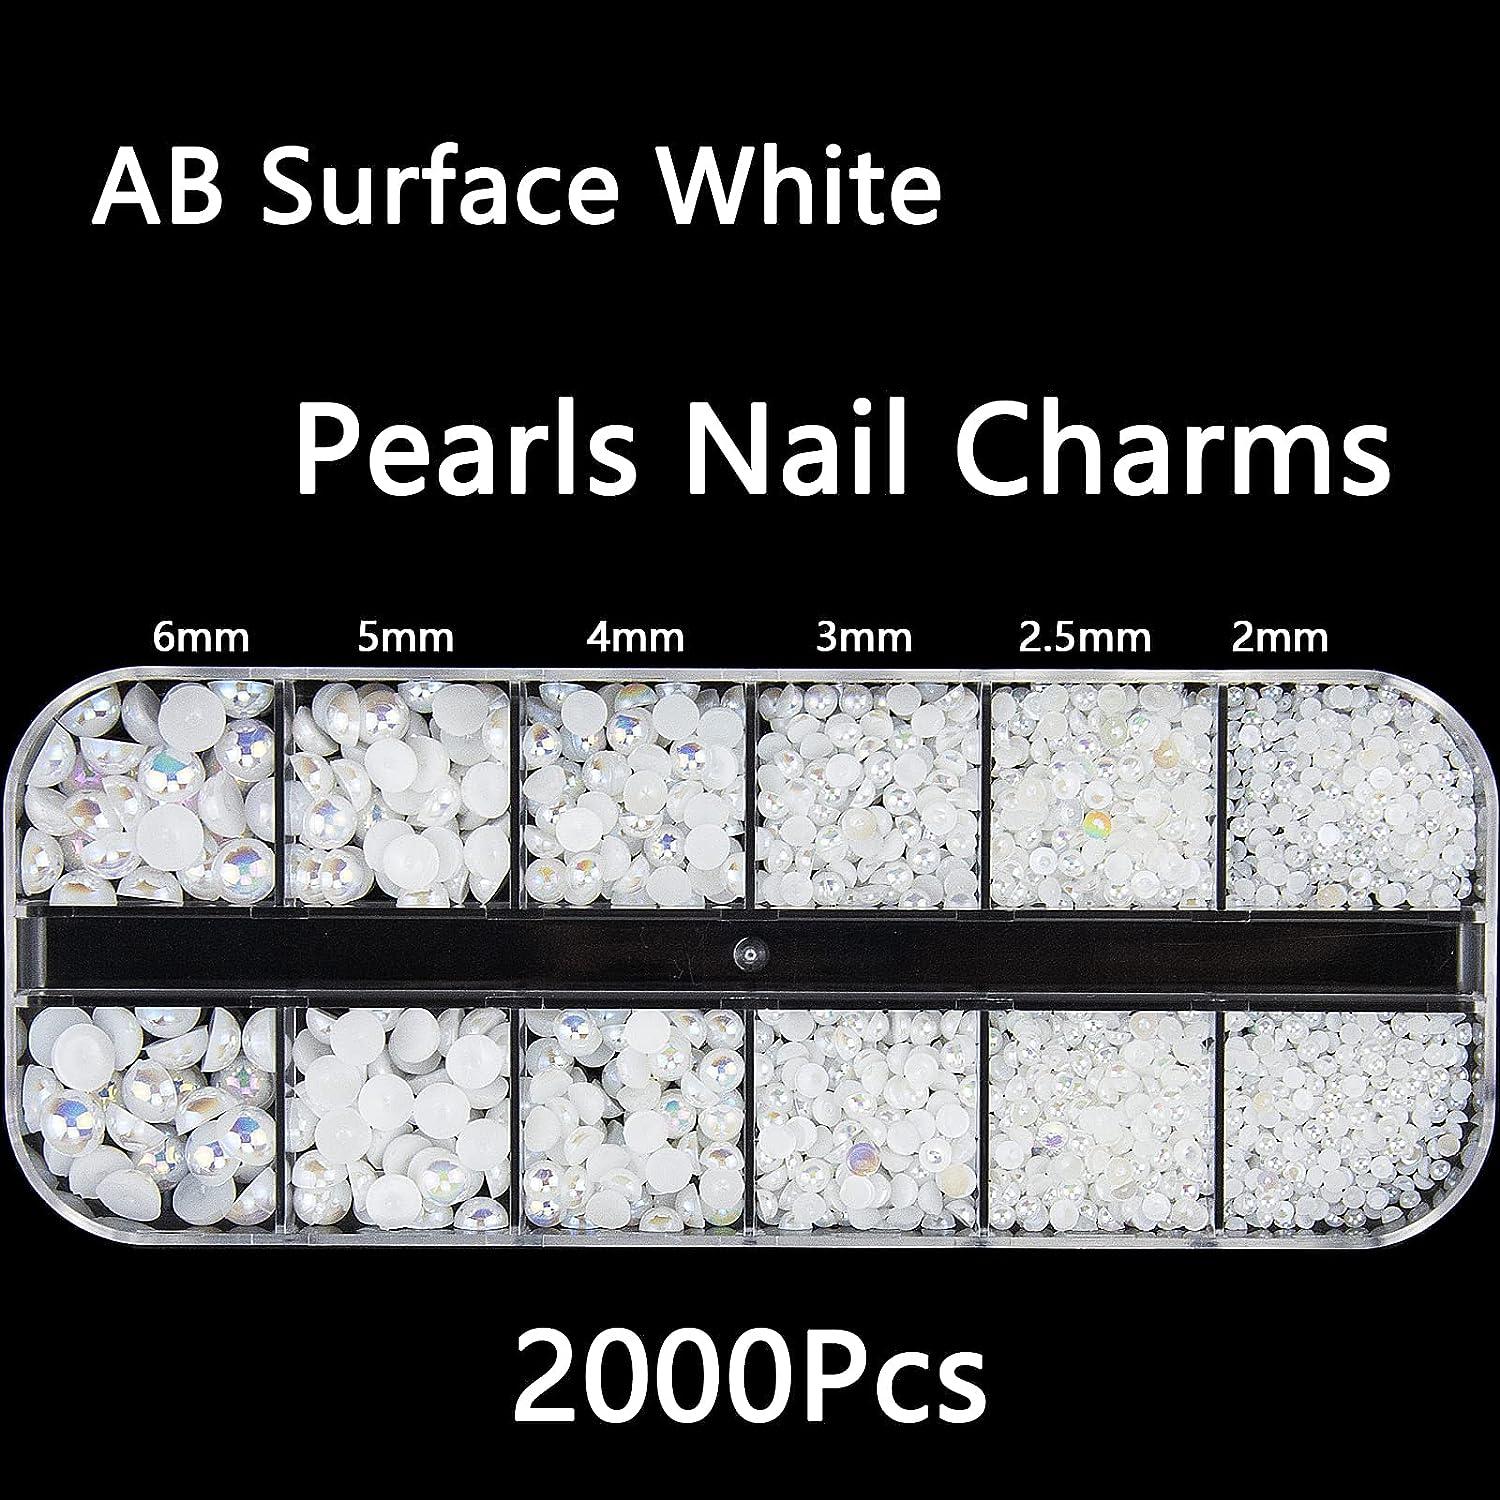 White Ivory Beige 2/3/4/6/8/10mm-25mm all sizes Imitation Pearl ABS Plastic  Half Round Loose Bead For Nail Art DIY Craft Garment - AliExpress